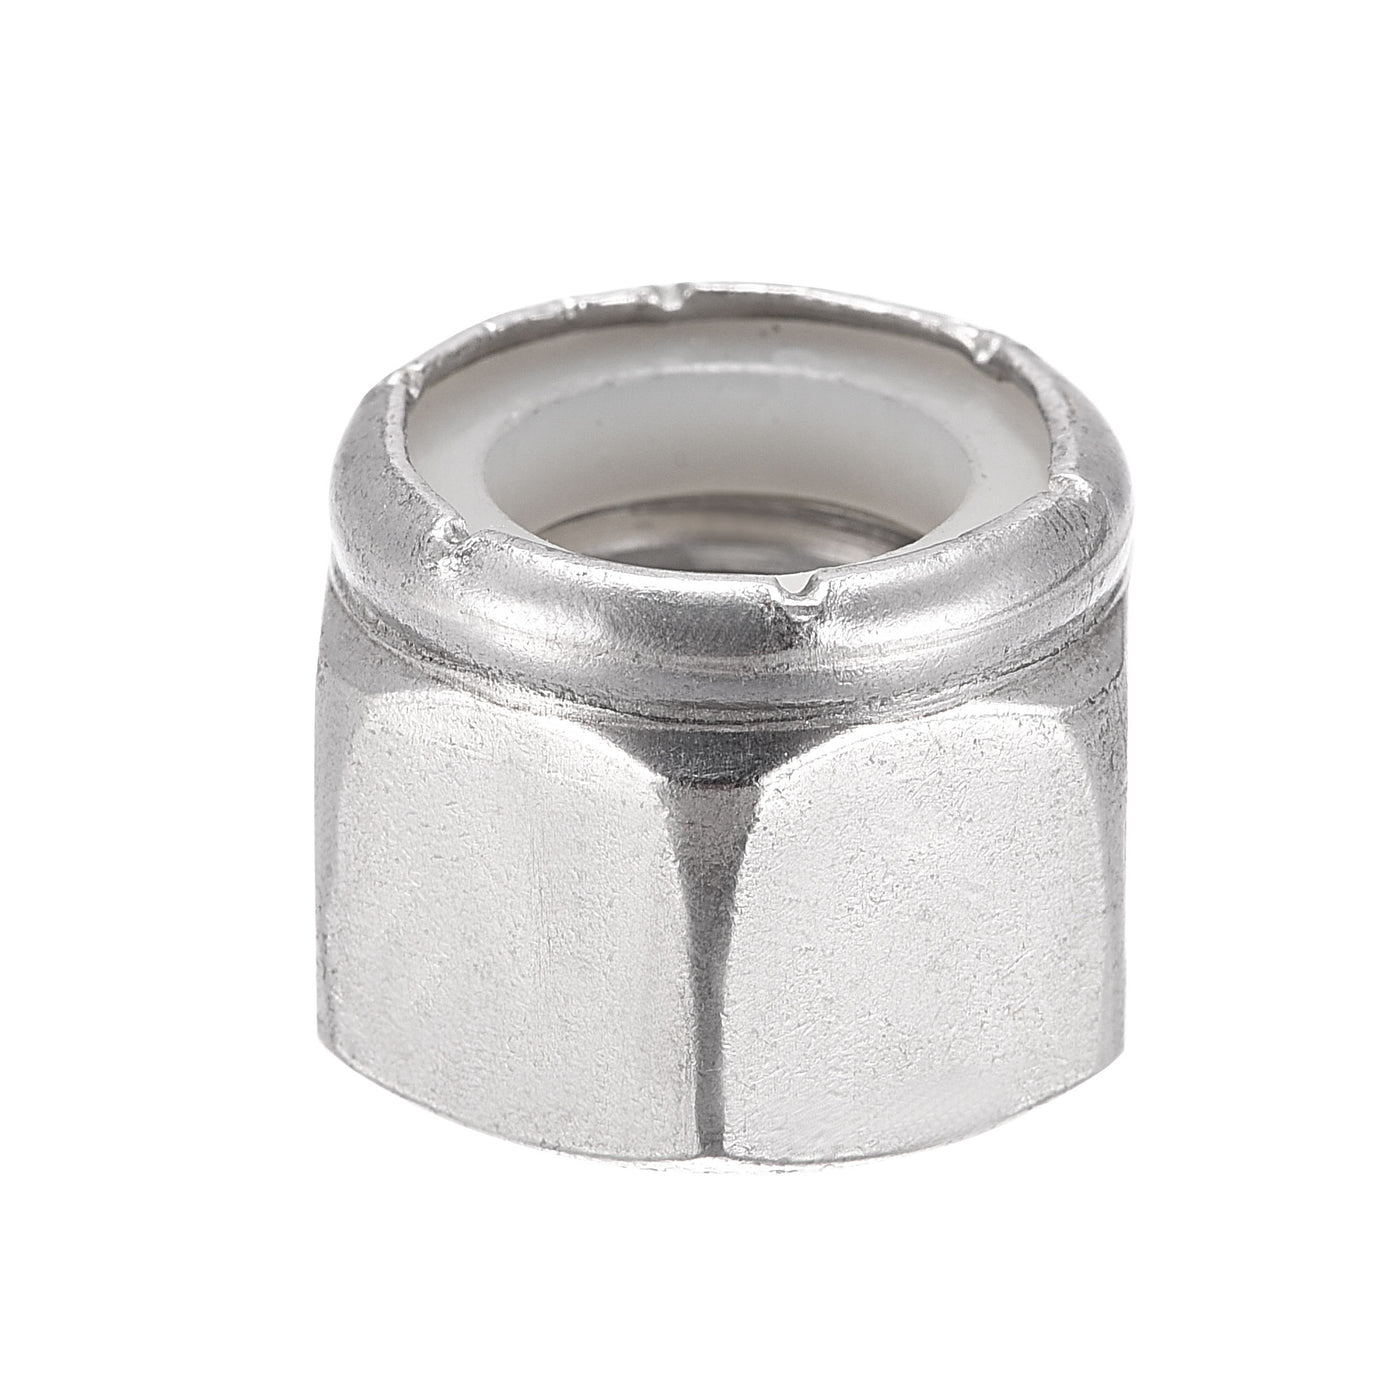 uxcell Uxcell 1/2-13 UNC Nylon Insert Hex Lock Nuts, 304 Stainless Steel, Plain Finish, 10pcs